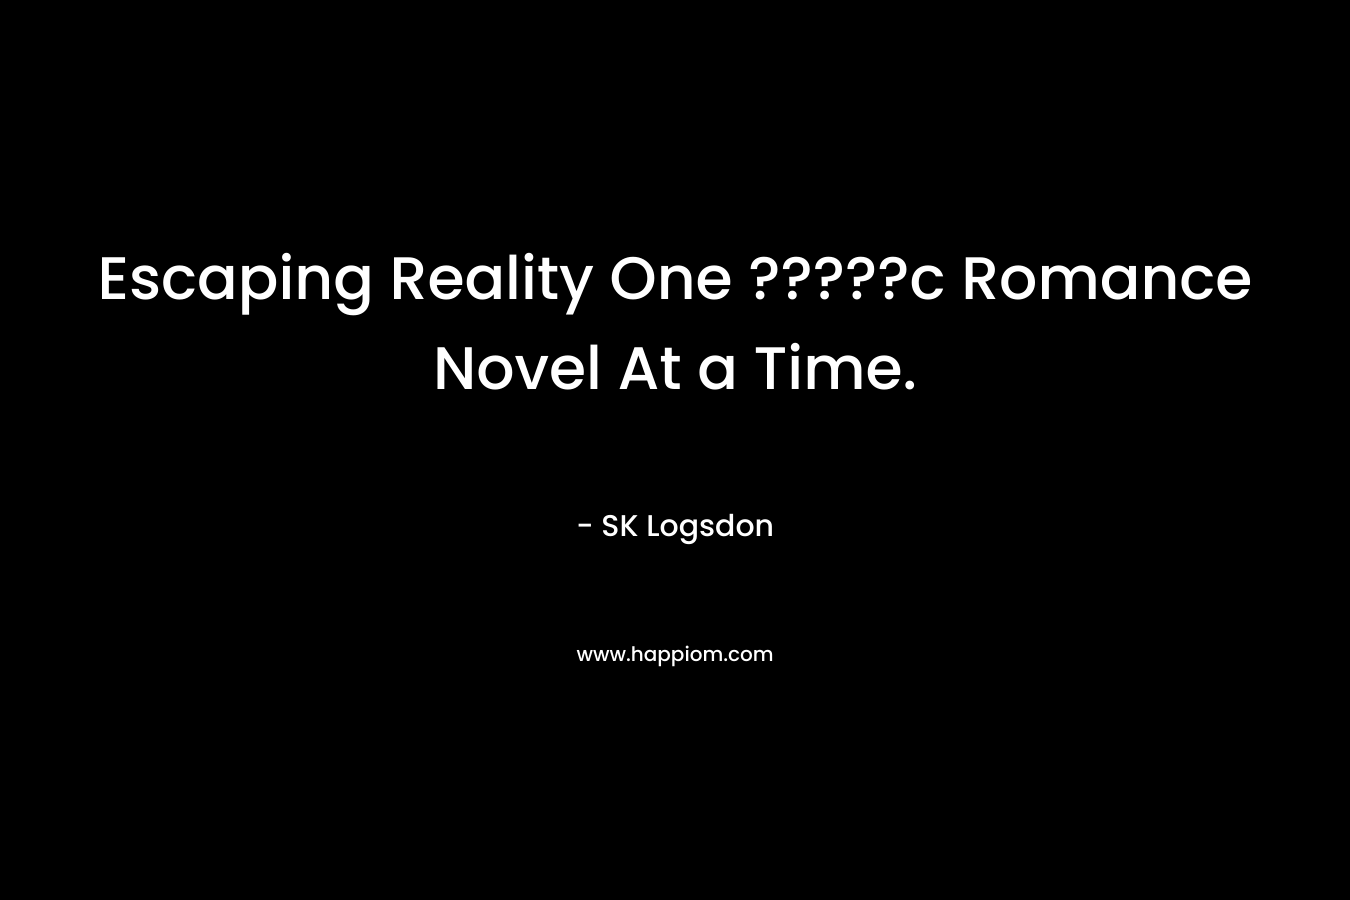 Escaping Reality One ?????c Romance Novel At a Time. – SK Logsdon